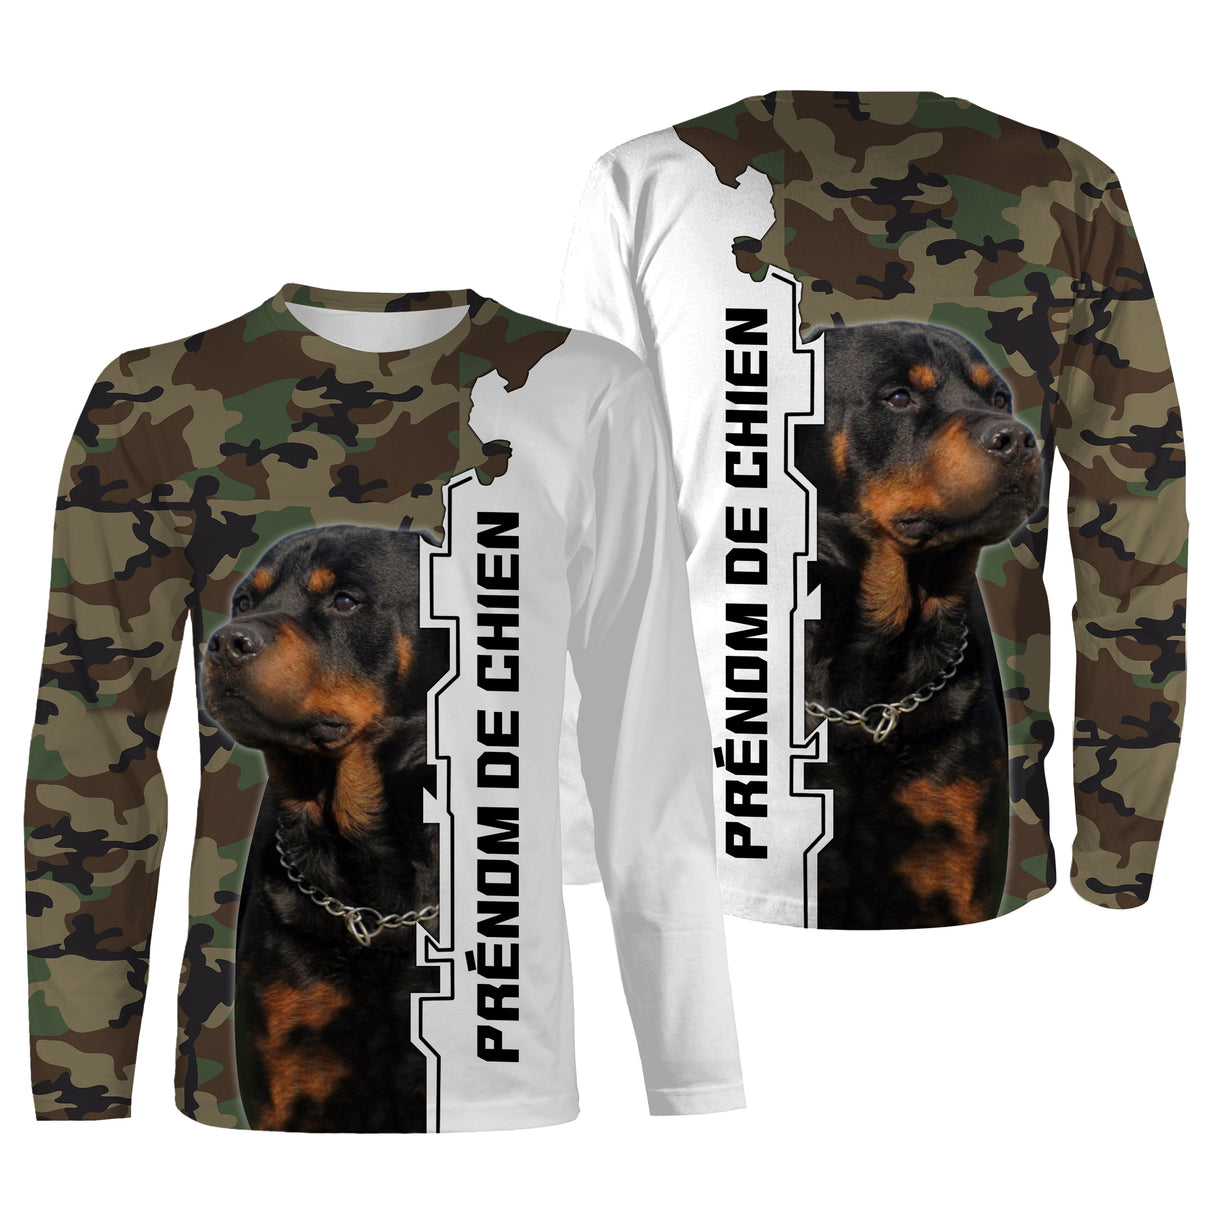 The Rottweiler, Dog Breed Originating from Germany, T-shirt, Hooded Sweatshirt for Men, Women, Personalized Gift - CTS14042215